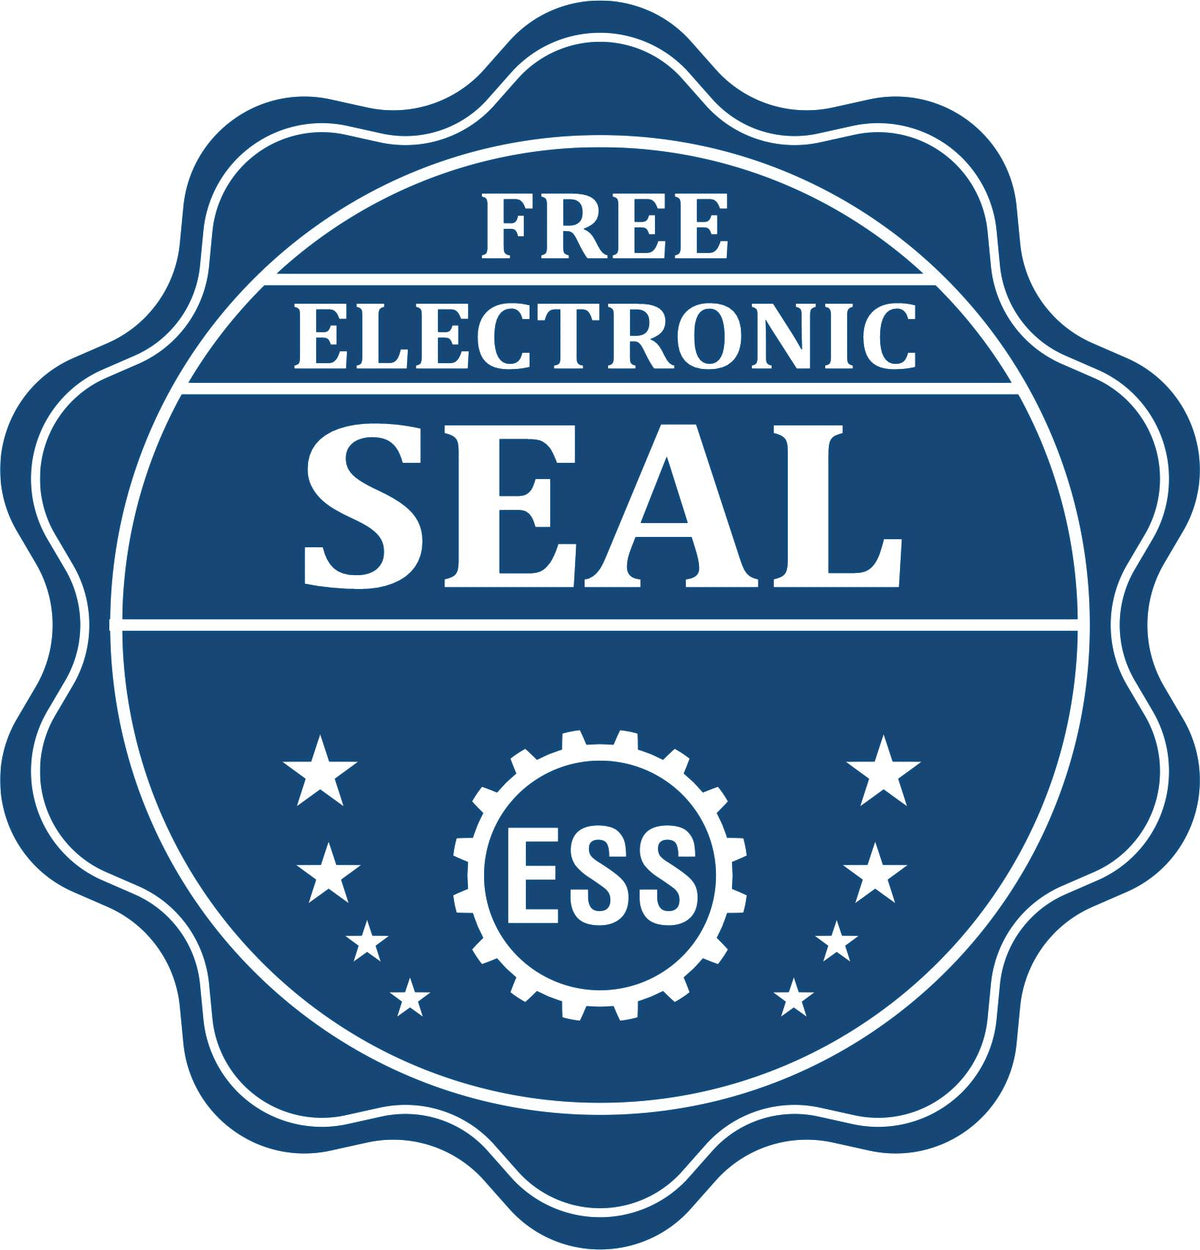 A badge showing a free electronic seal for the Heavy Duty Cast Iron Indiana Engineer Seal Embosser with stars and the ESS gear on the emblem.